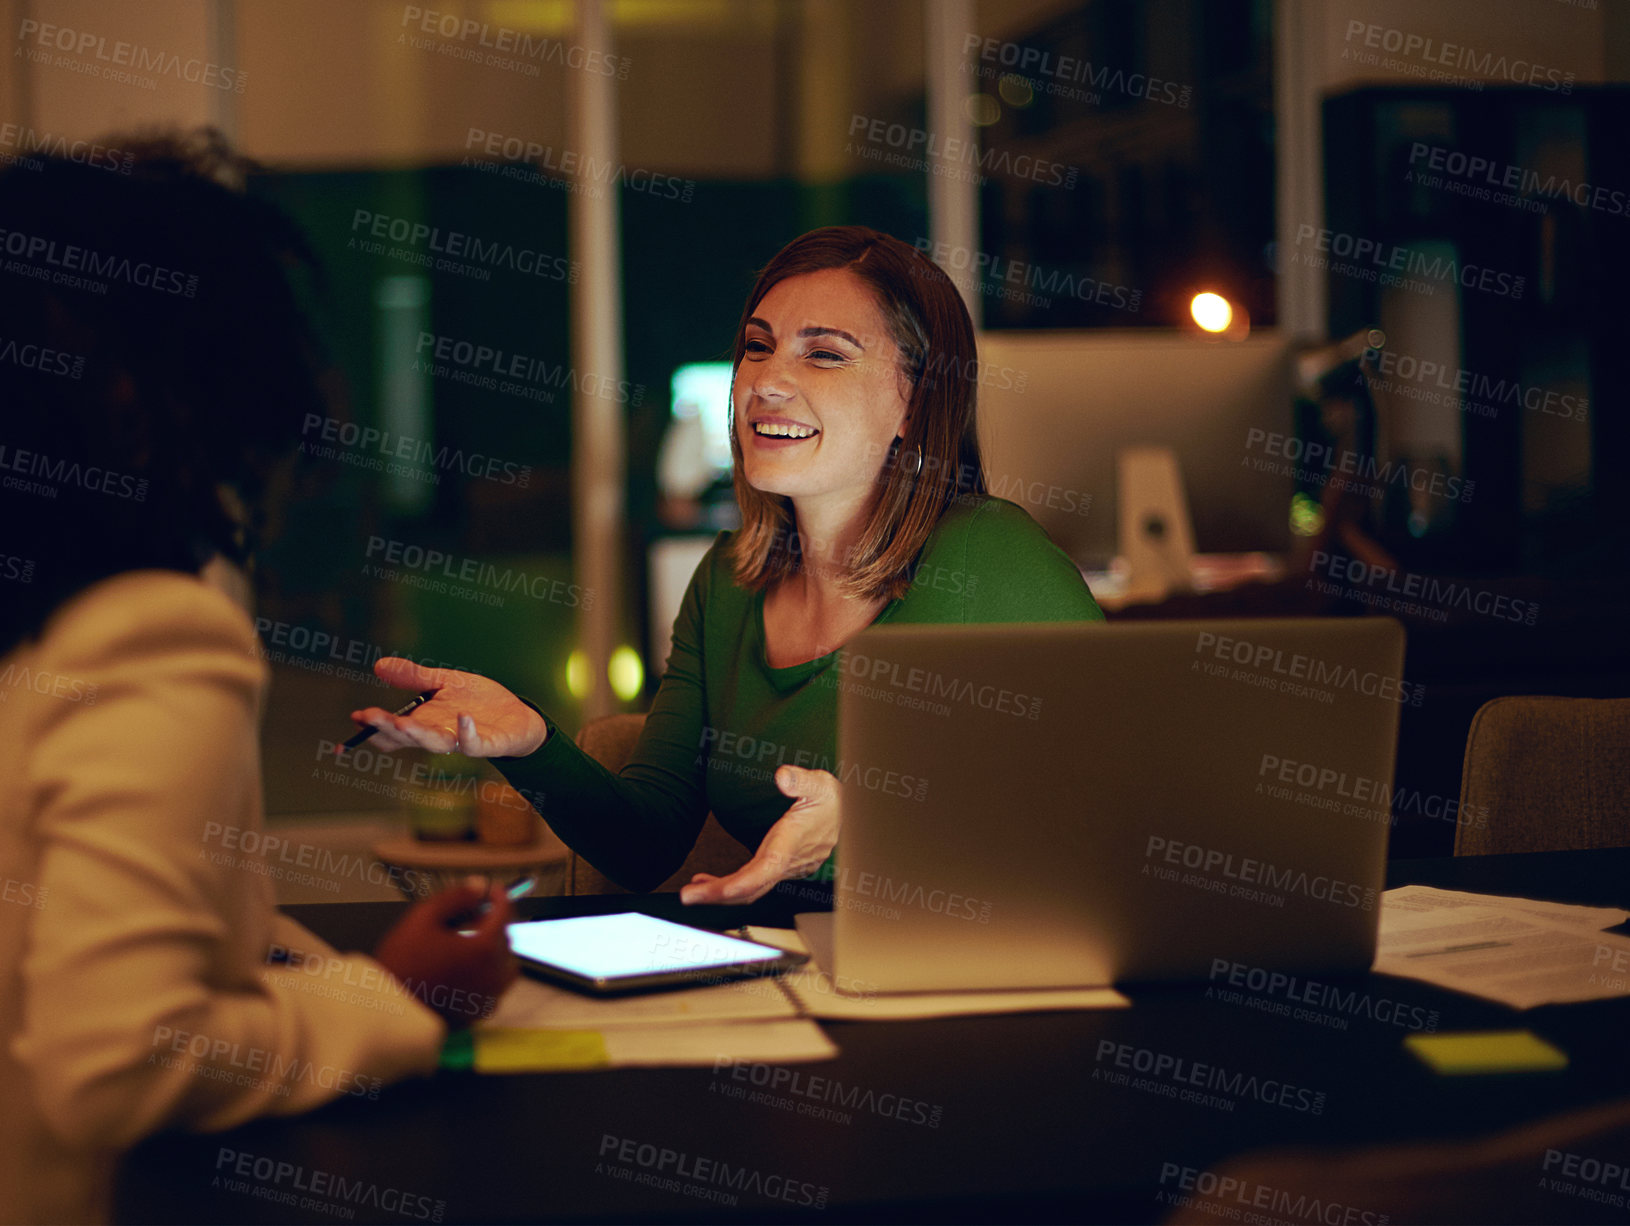 Buy stock photo Shot of two businesswomen working together in an office at night